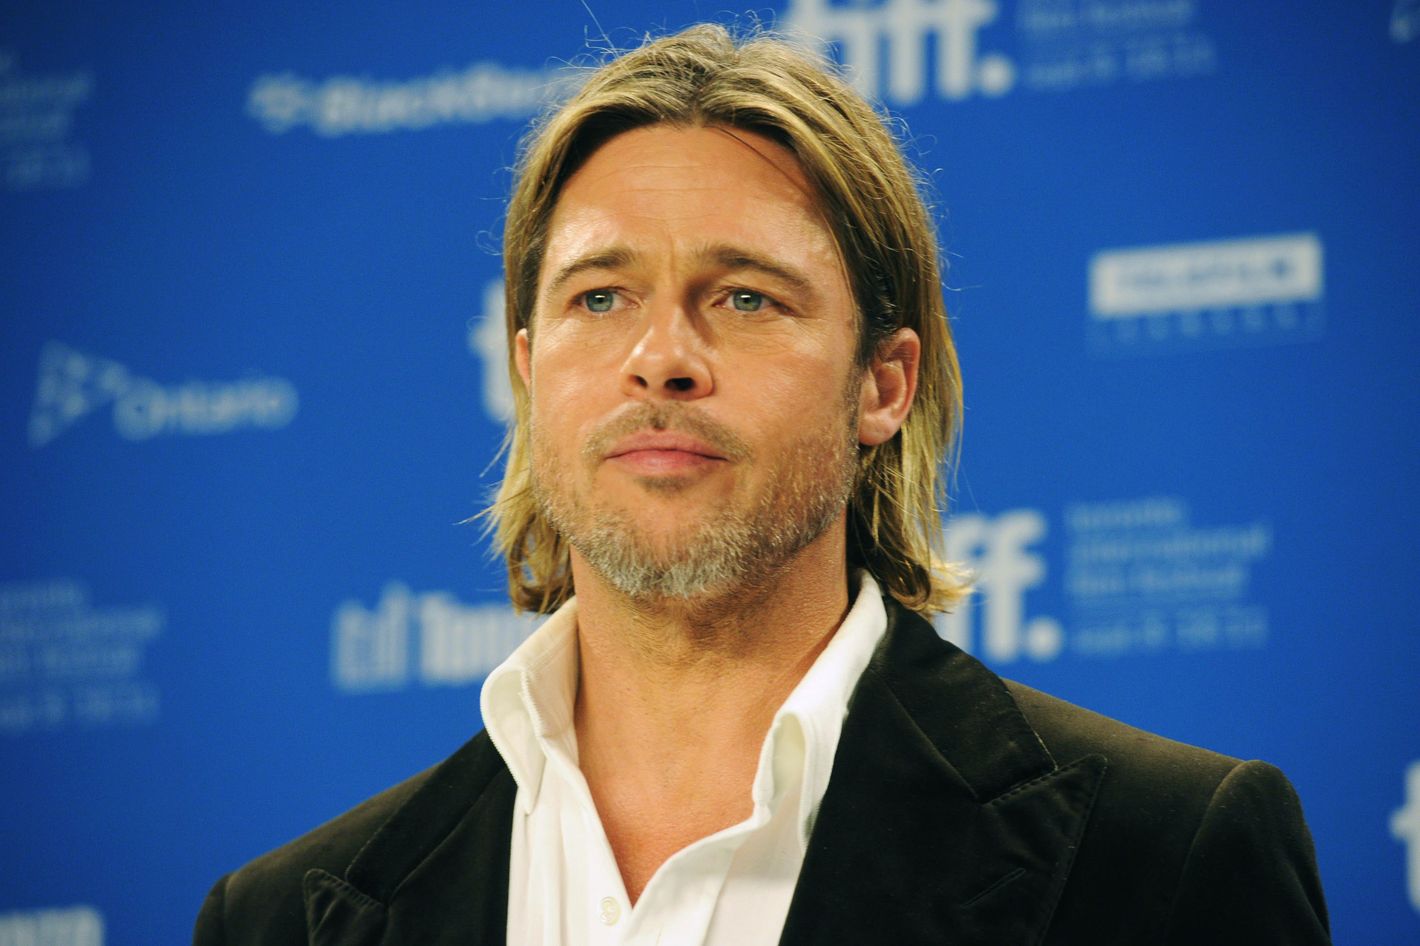 Photo: Brad Pitt as the First Male Face of Chanel No. 5